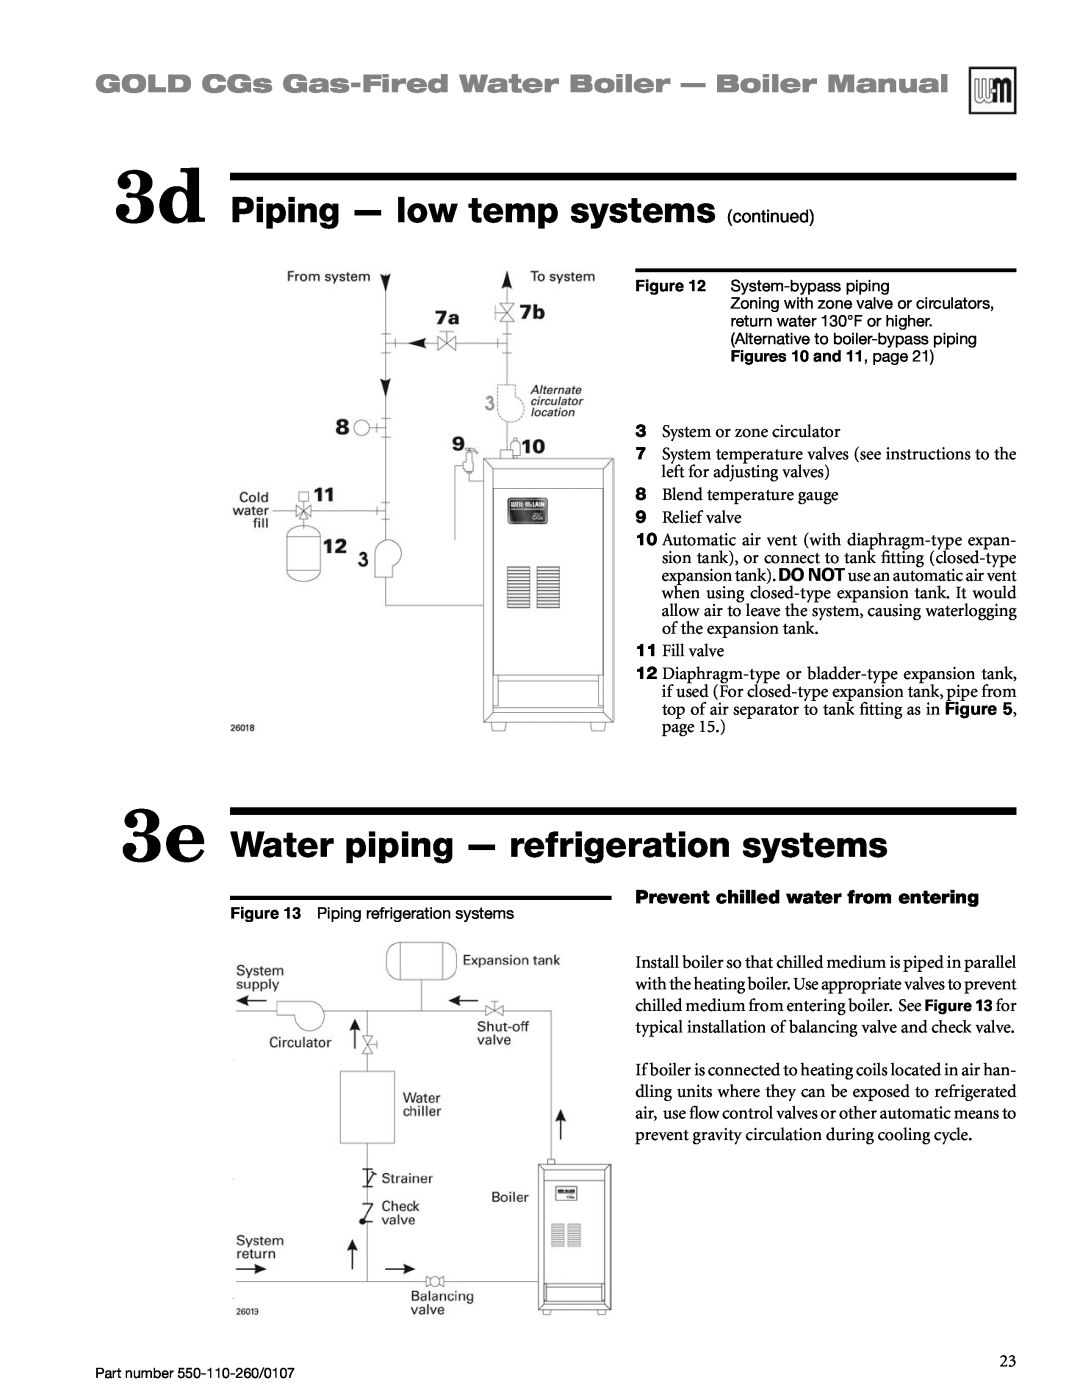 Weil-McLain 550-110-260/0107 manual 3e Water piping — refrigeration systems, 3d Piping — low temp systems continued 